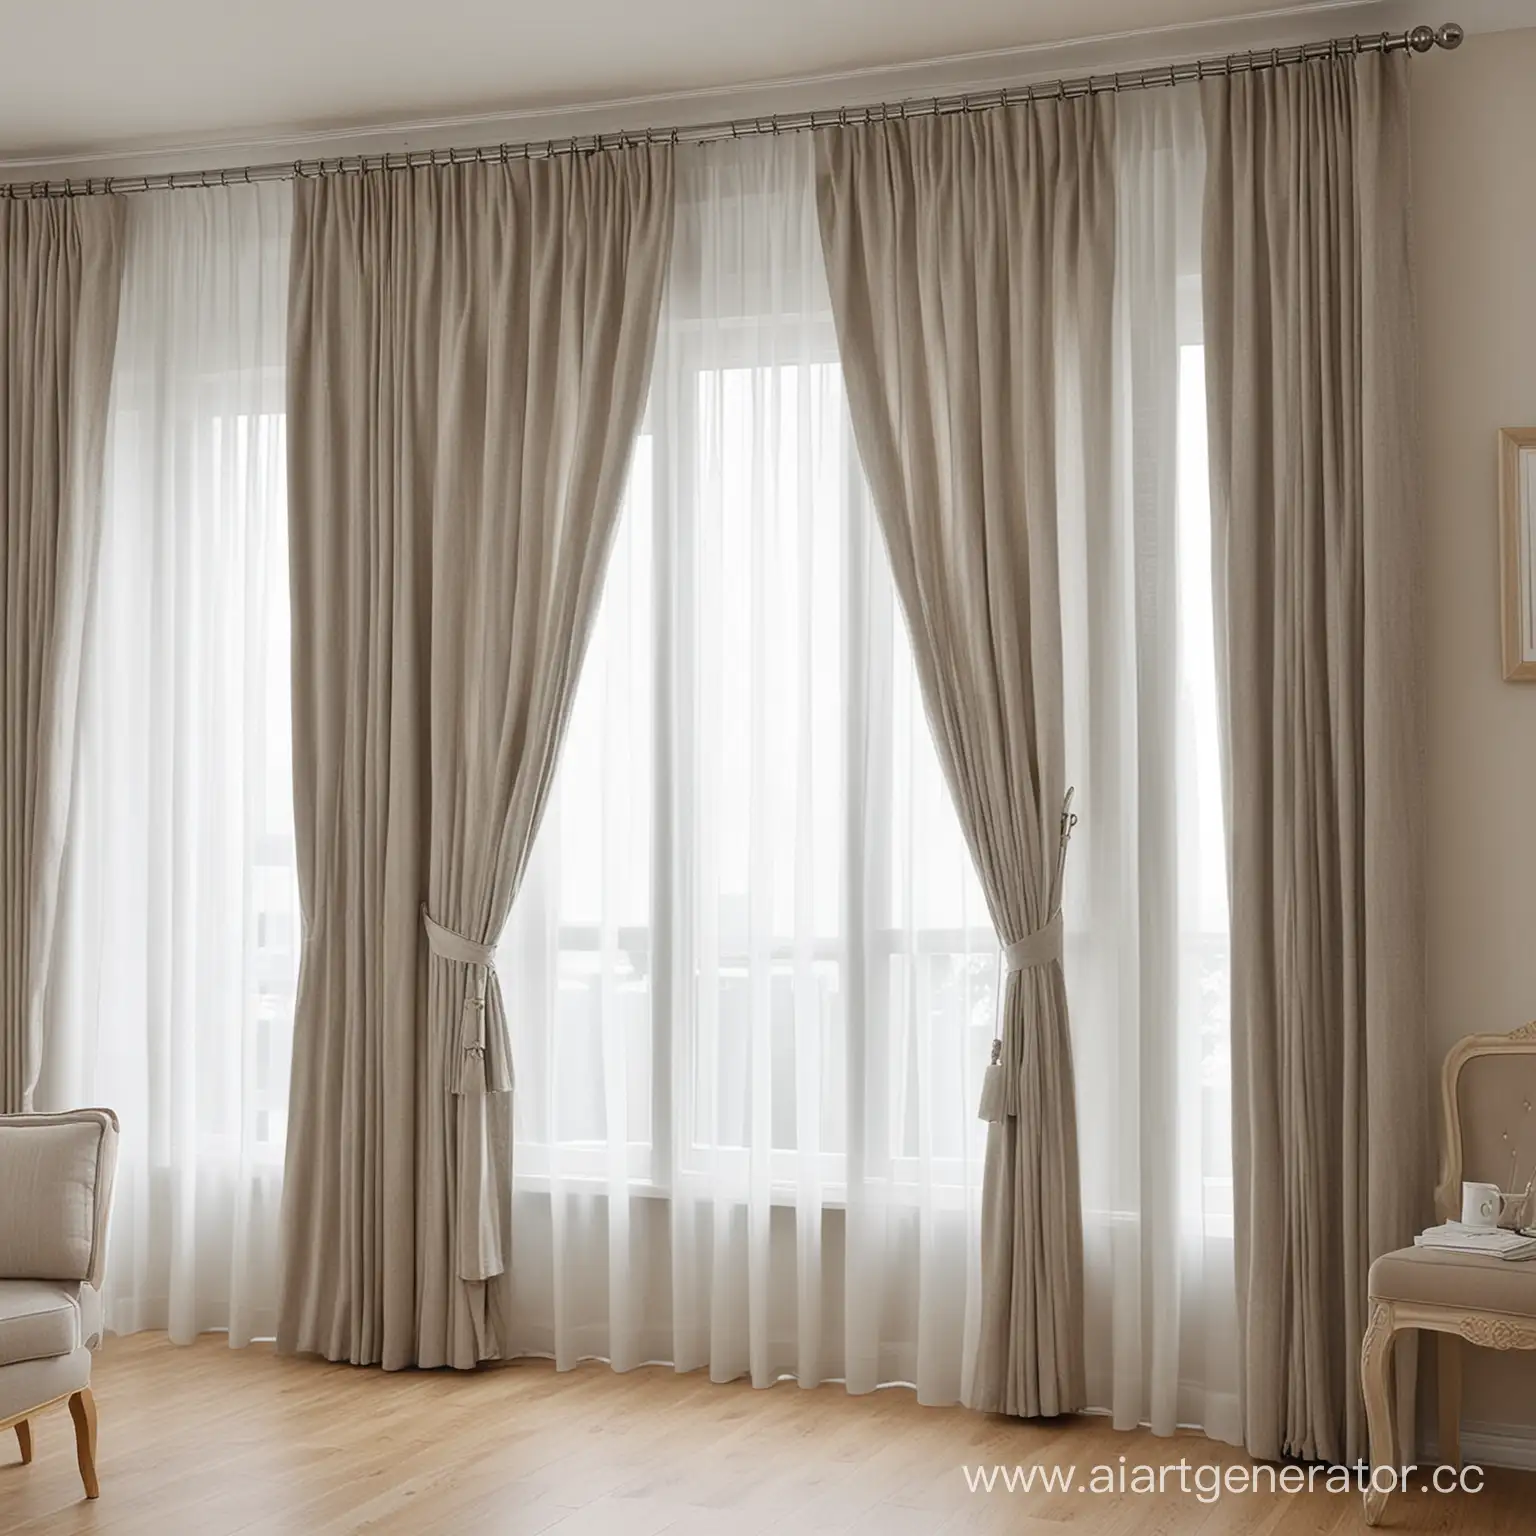 Tending-to-Curtains-A-Delicate-Homemaking-Moment